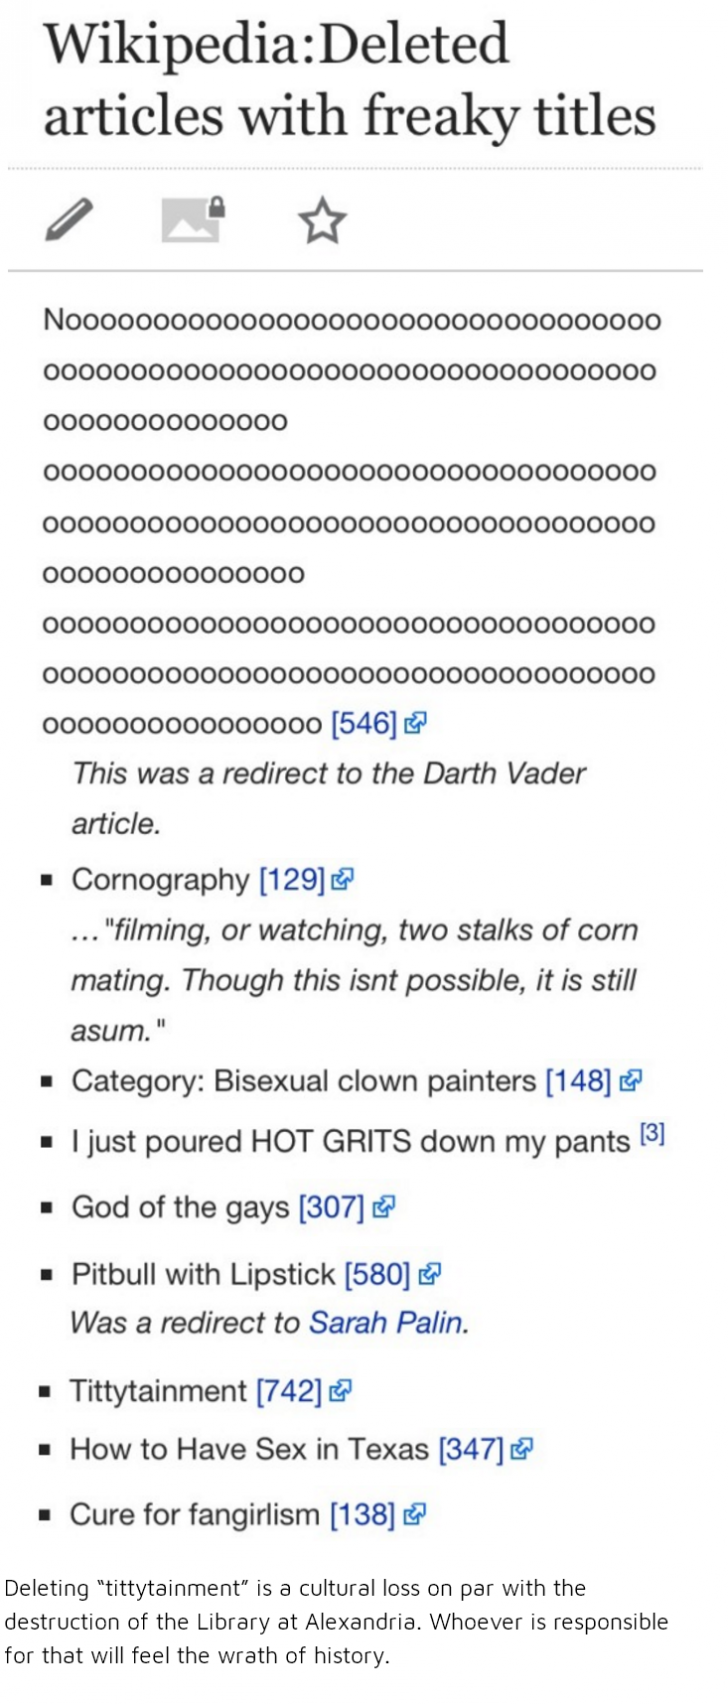 Wikipedia has something against freaky titles